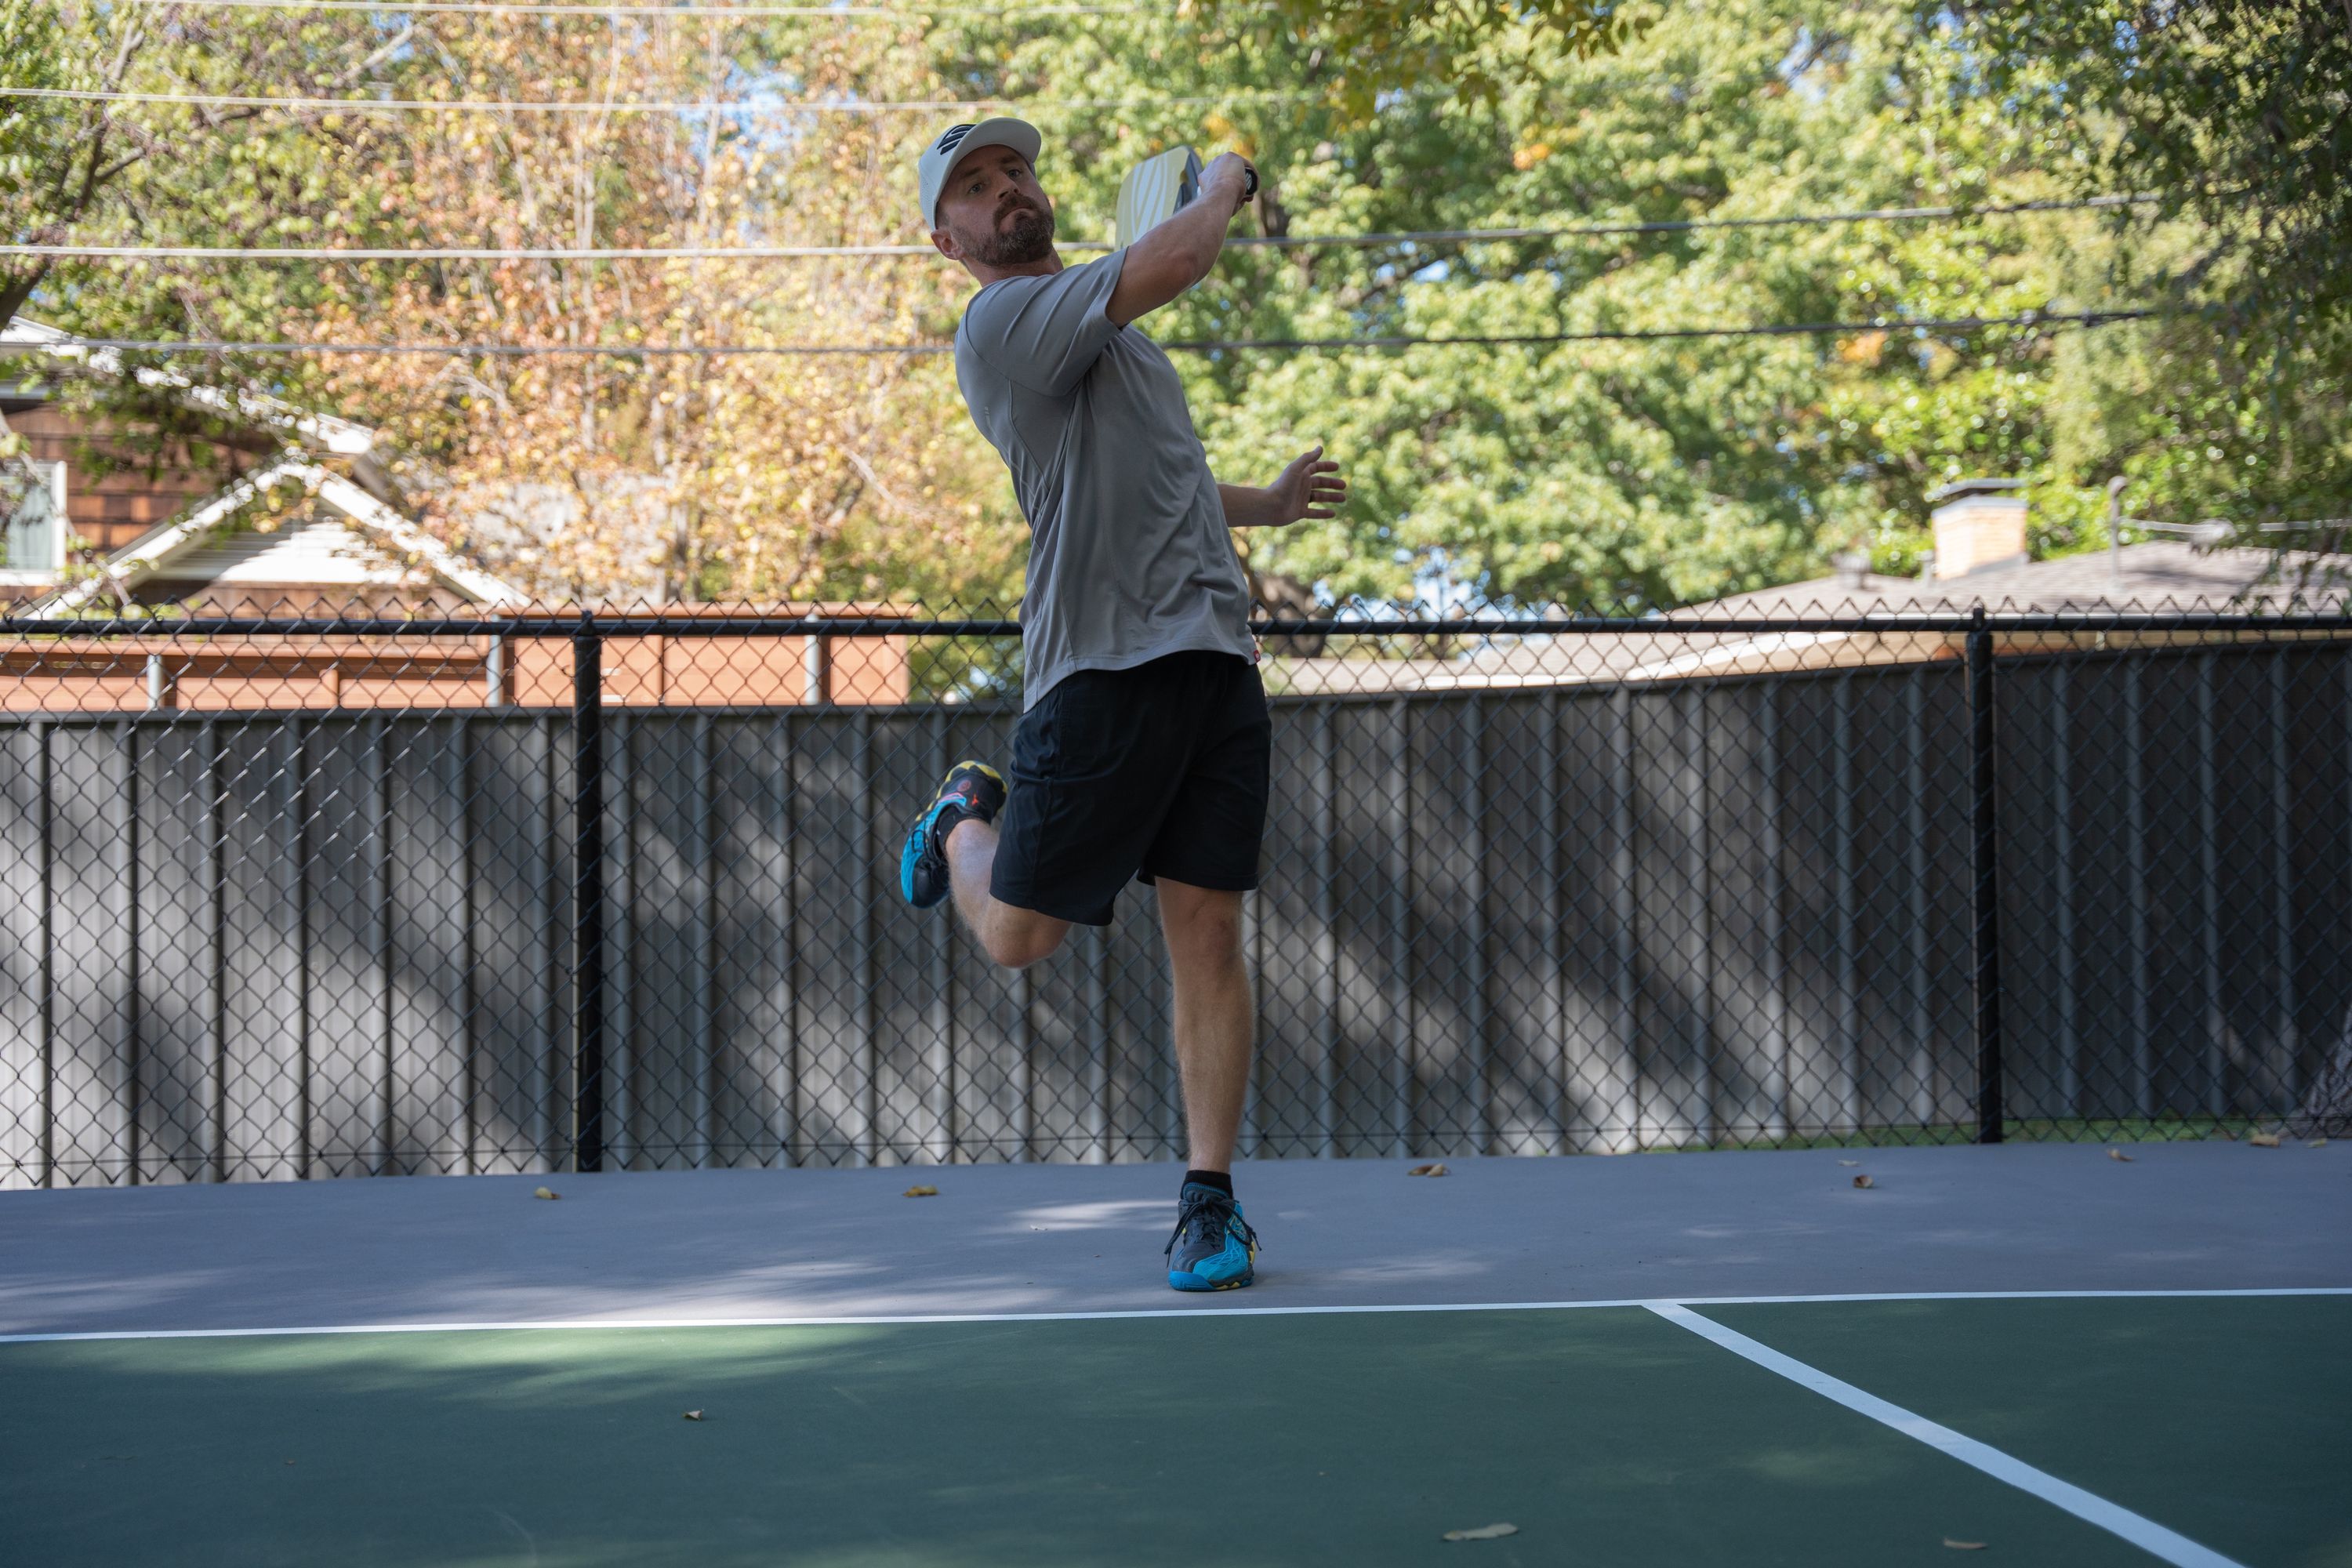 Learning to serve in pickleball can be one of the most difficult parts of the game for a beginner. Here are some of the most common illegal pickleball serves.